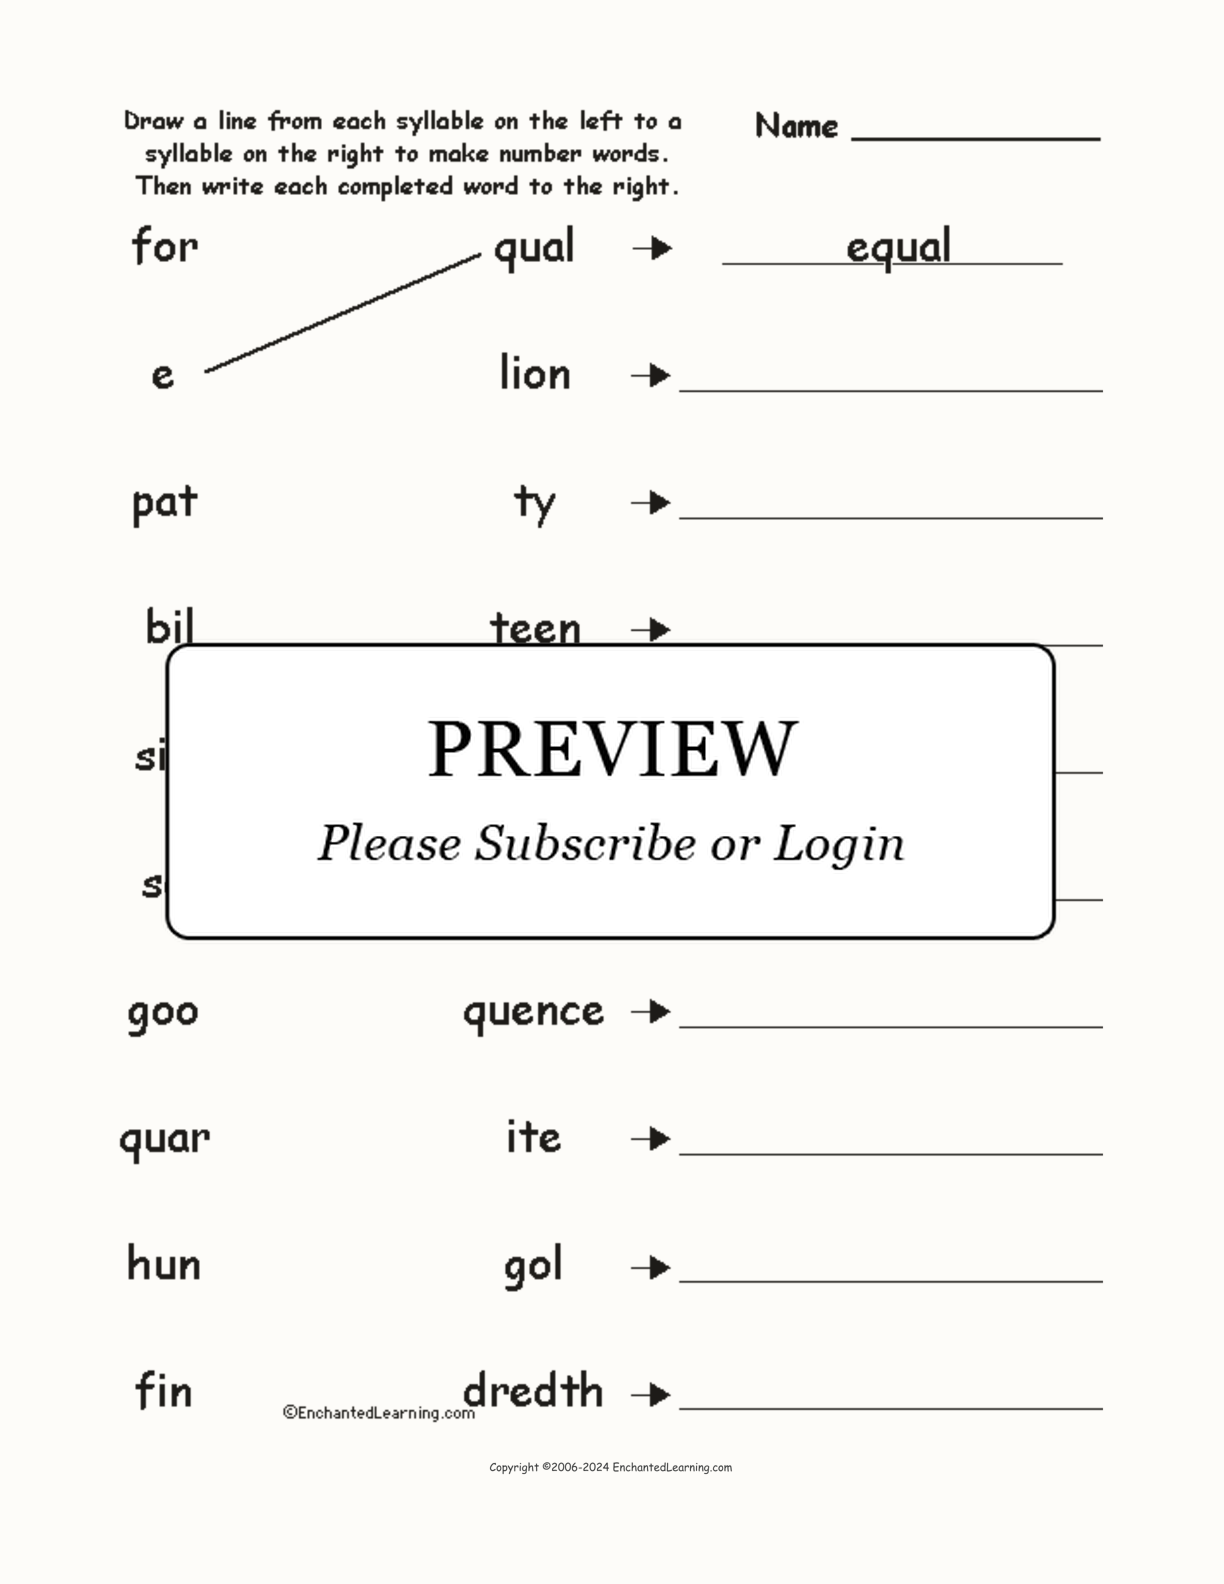 Match the Syllables: Number Words #2 interactive worksheet page 1